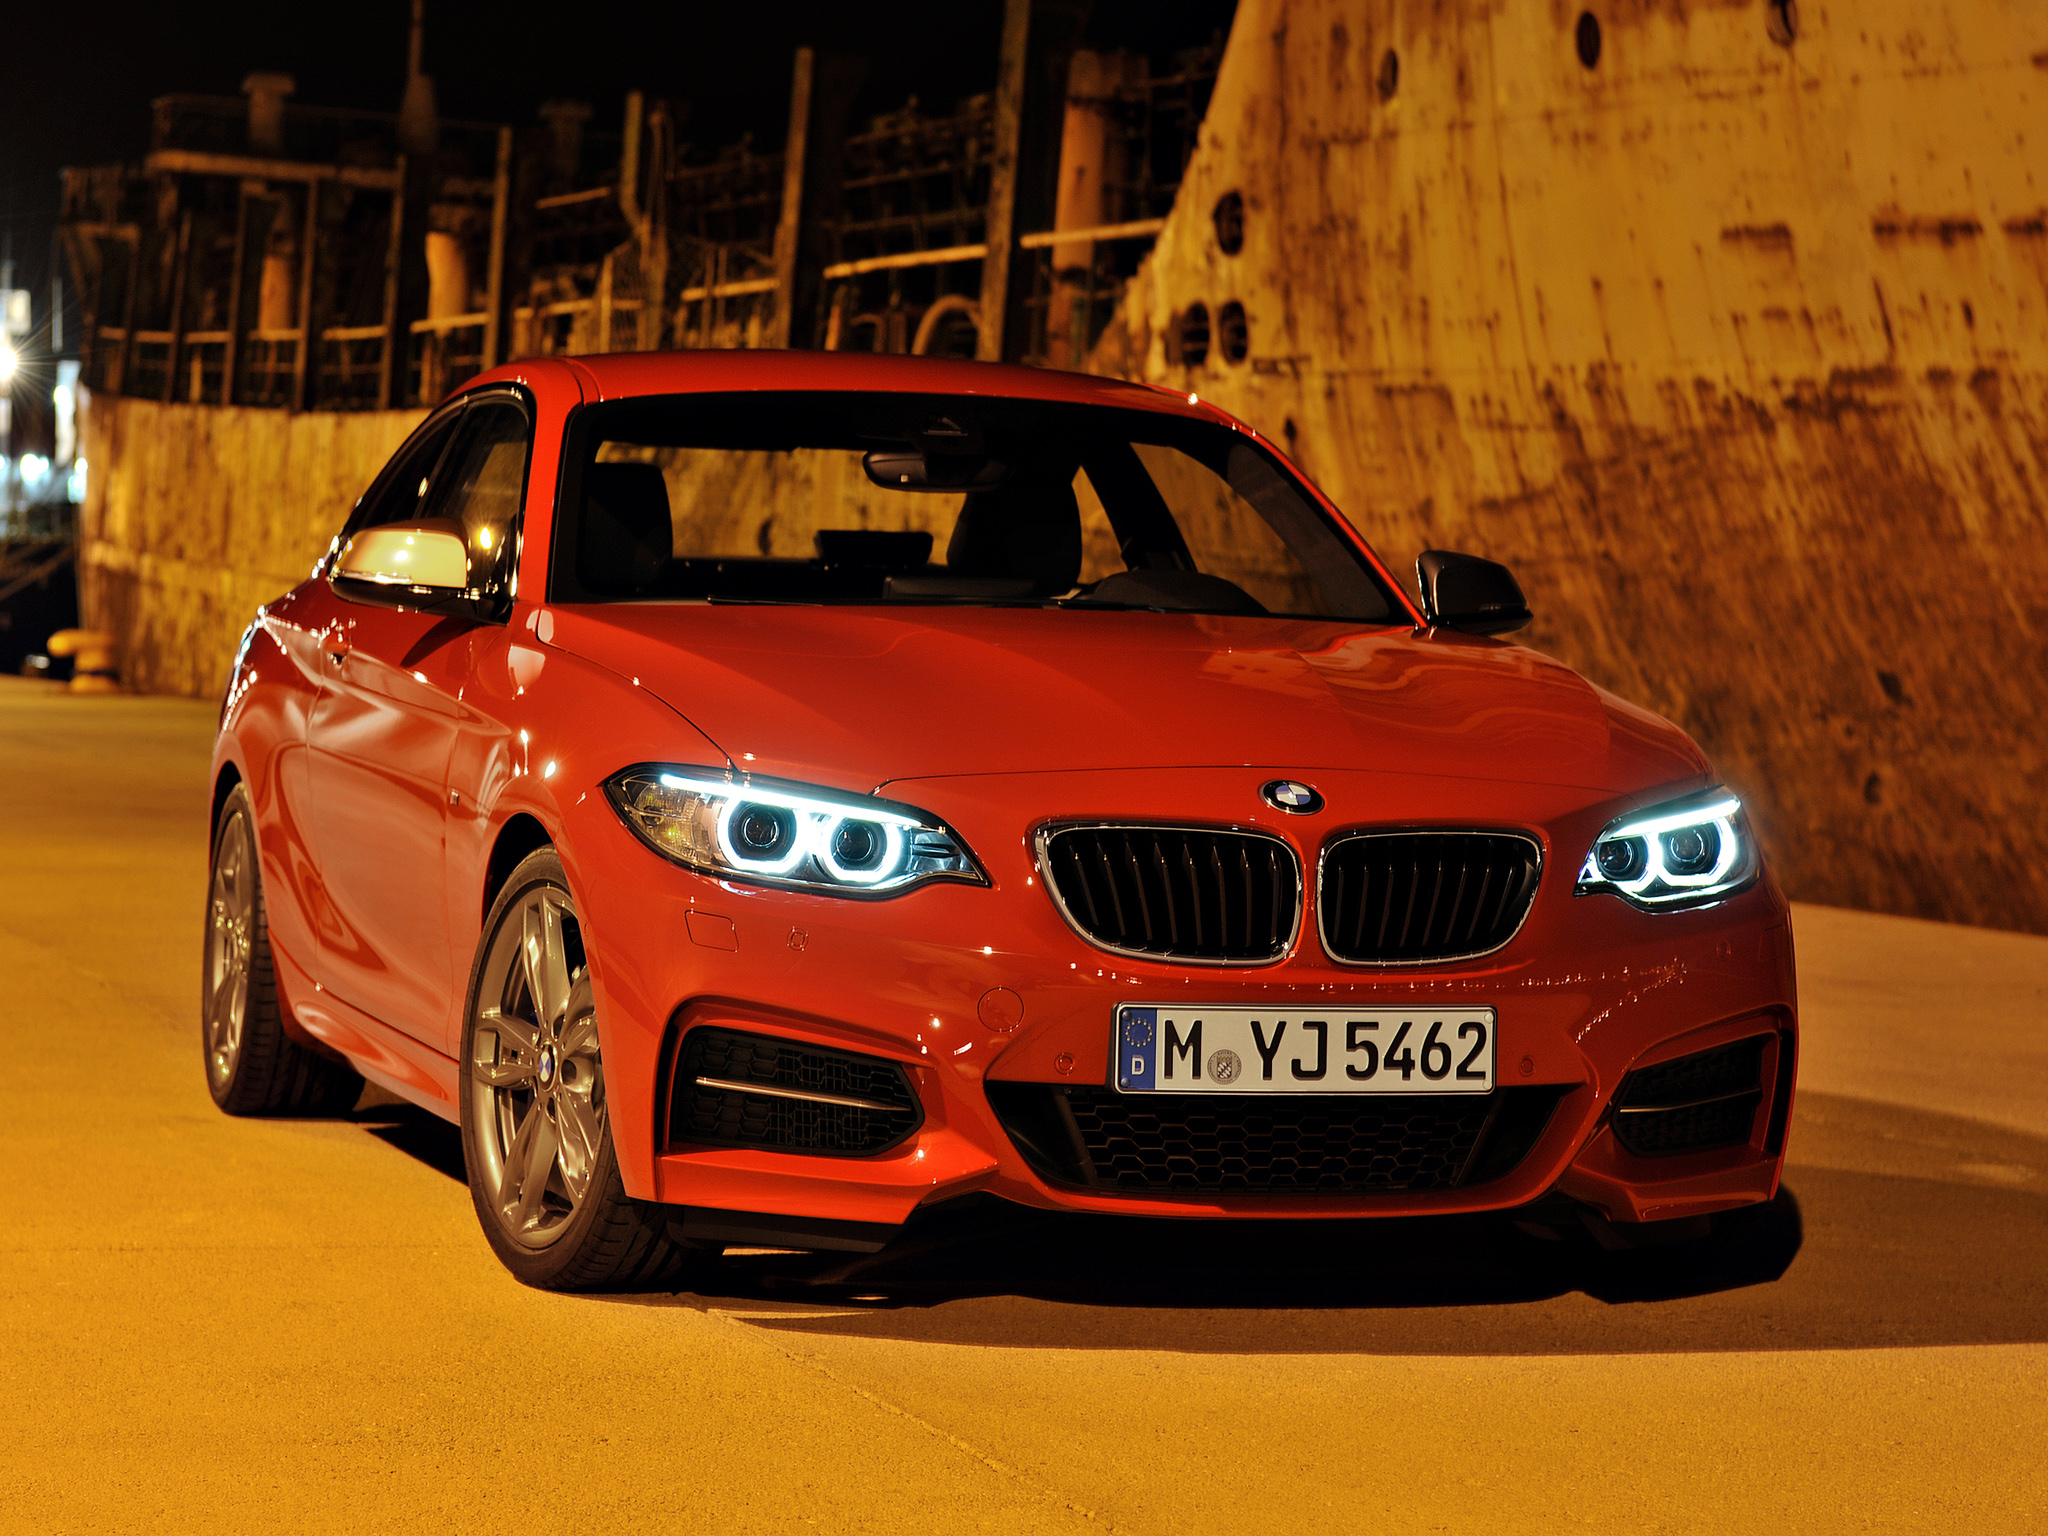 General 2048x1536 BMW car red cars BMW 2 Series licence plates